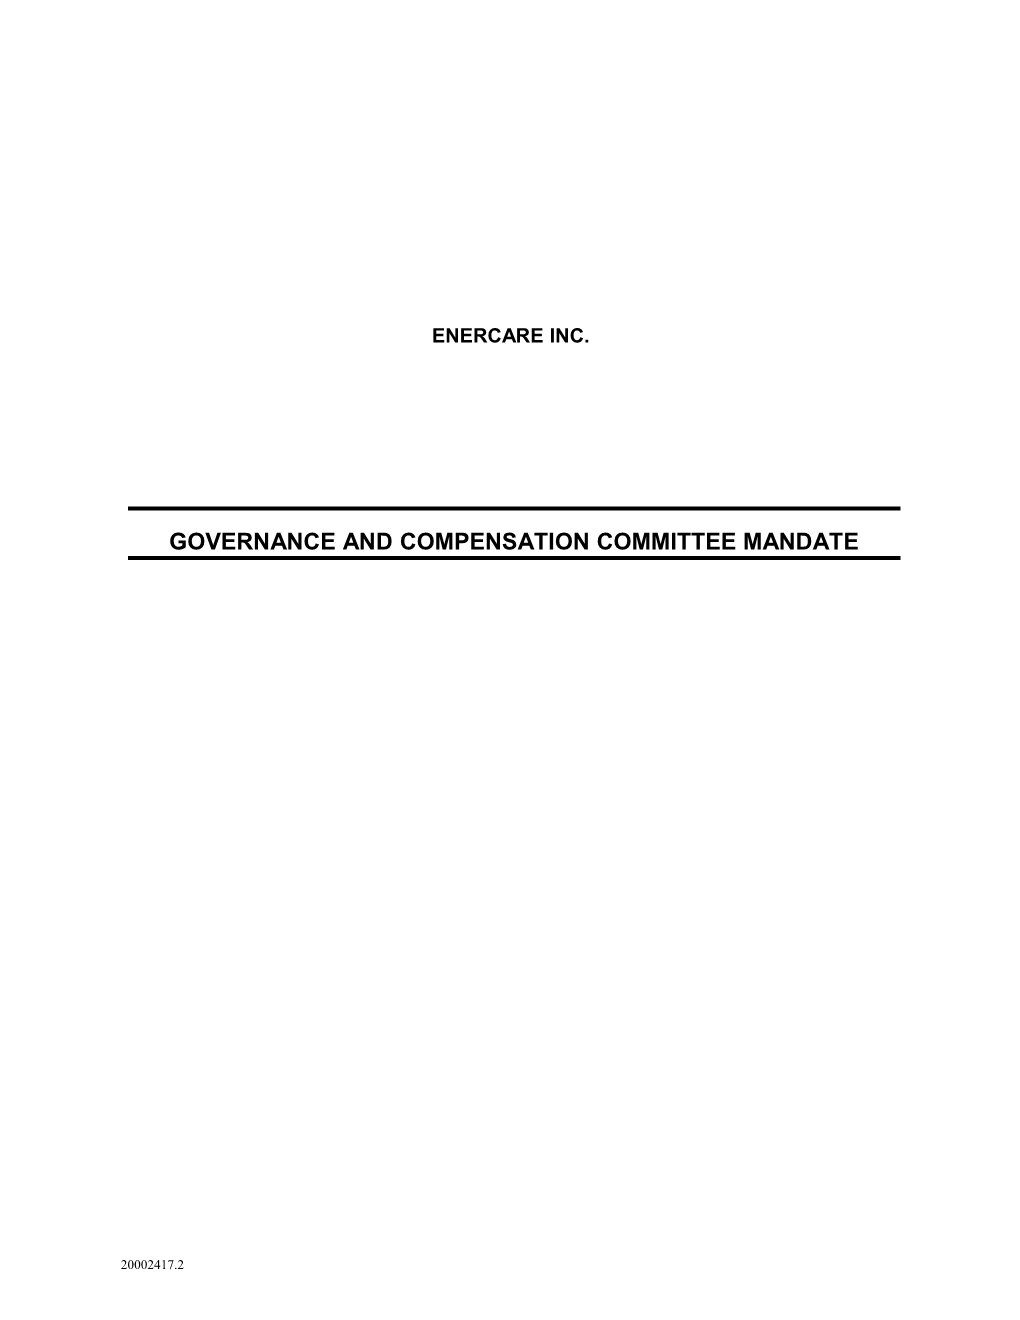 Governance and Compensation Committee Mandate